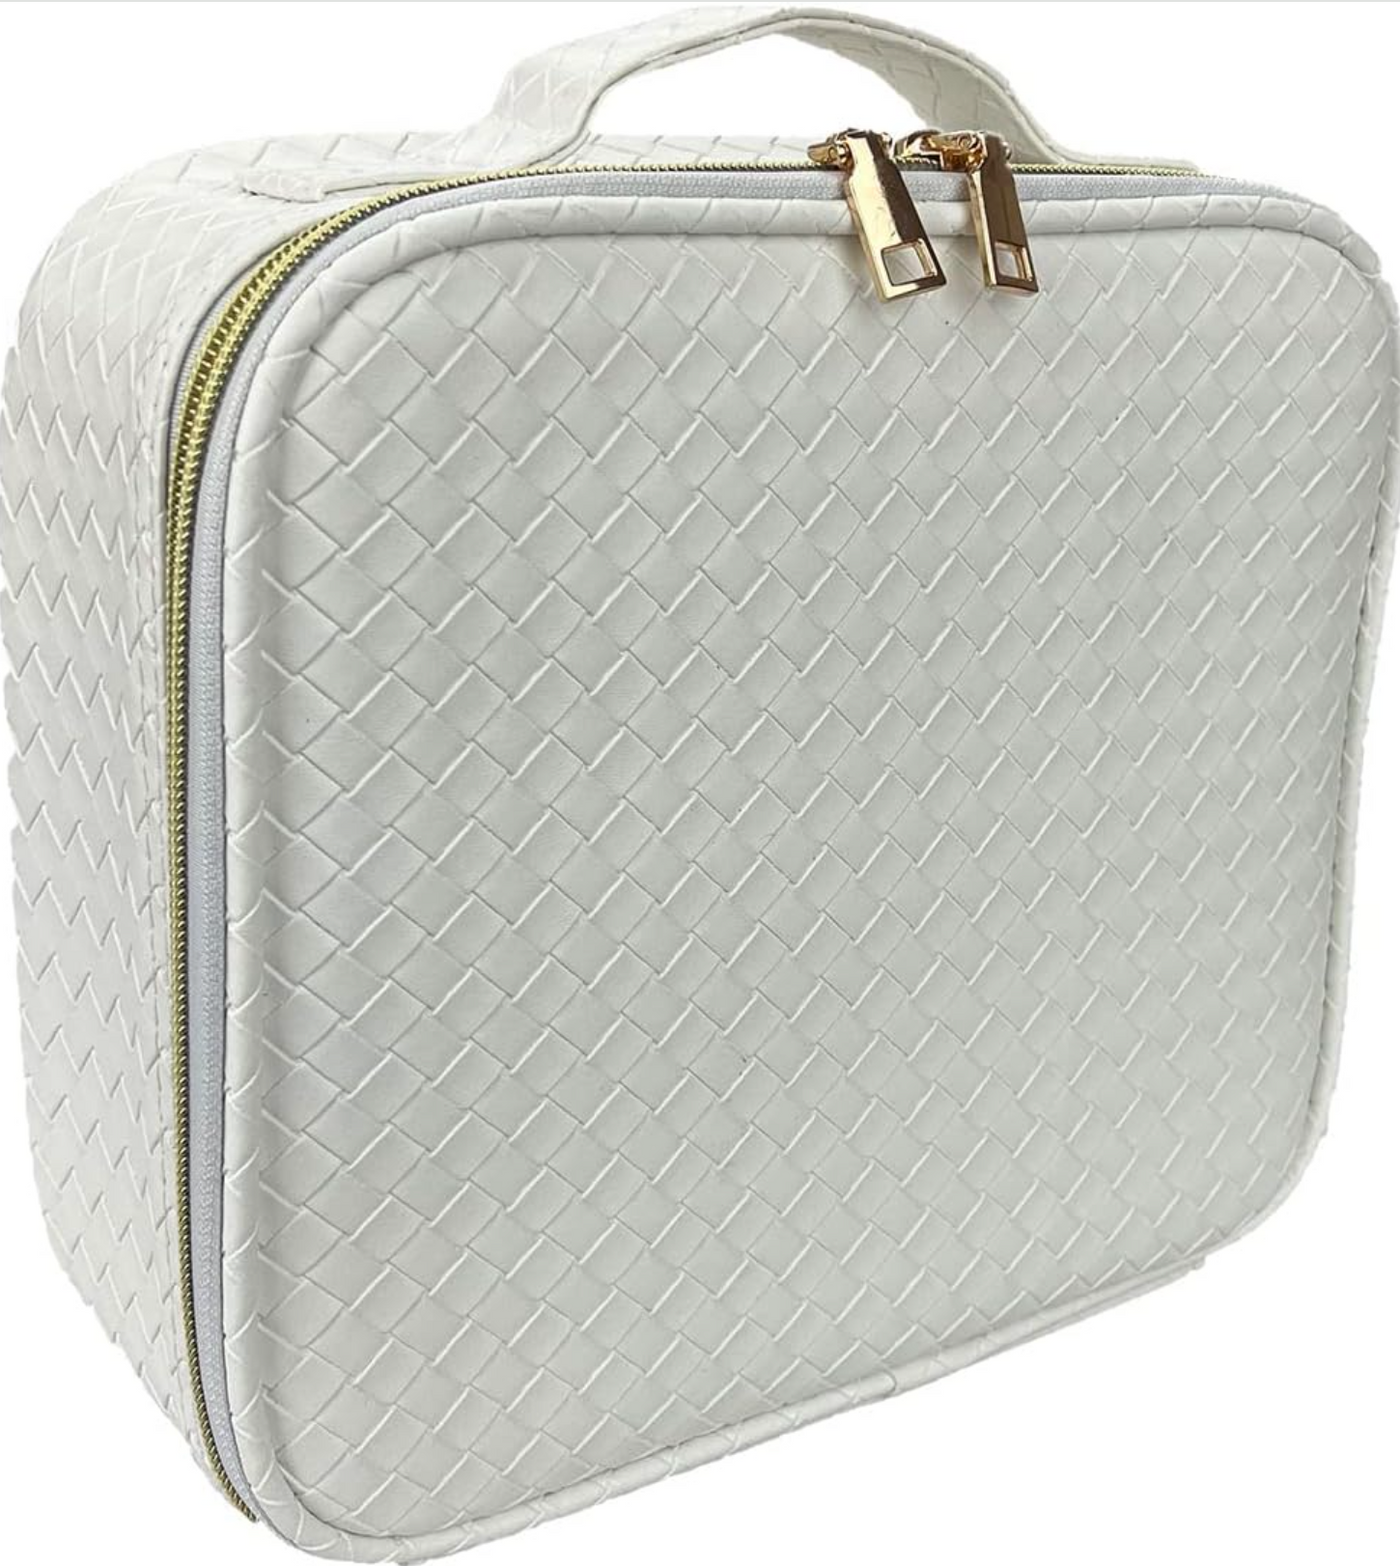 COSMETIC BAG WOVEN WHITE LARGE